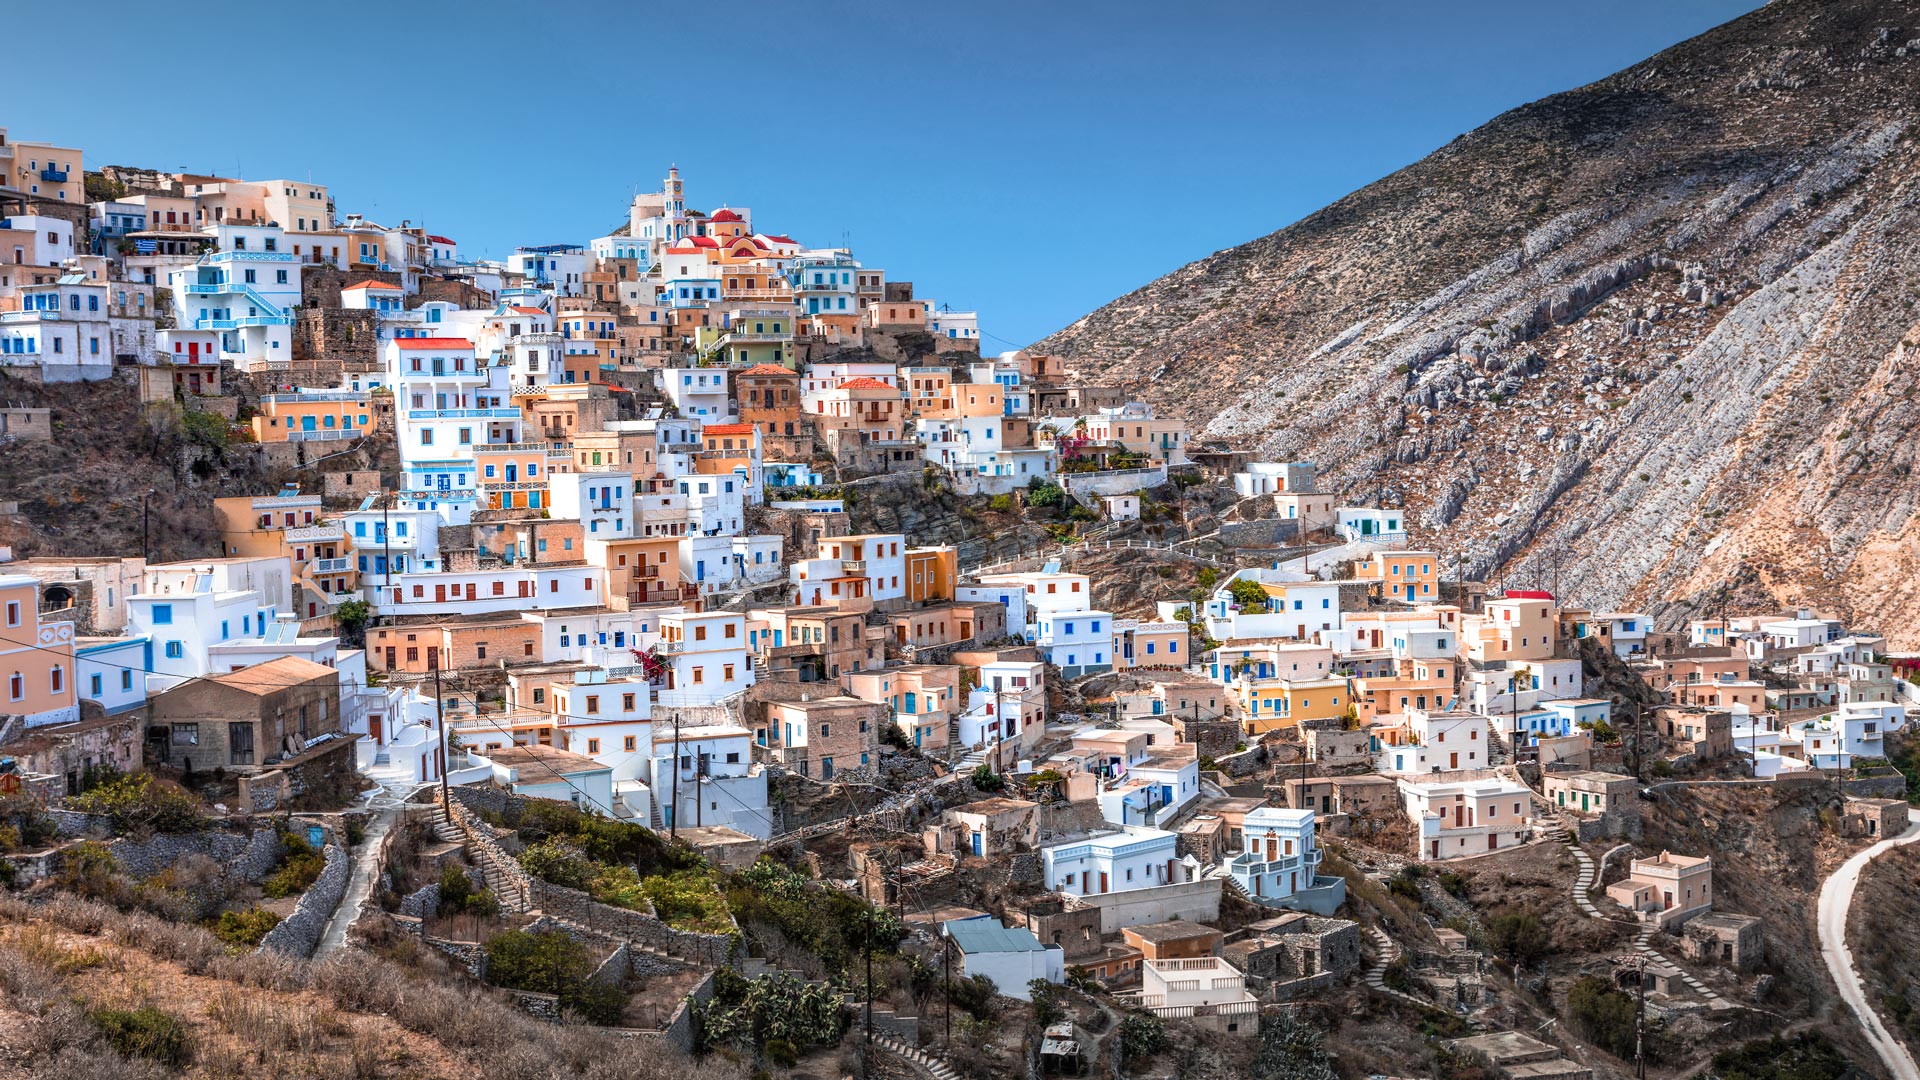 Olymbos, the most famous village in Karpathos island, with panoramic views